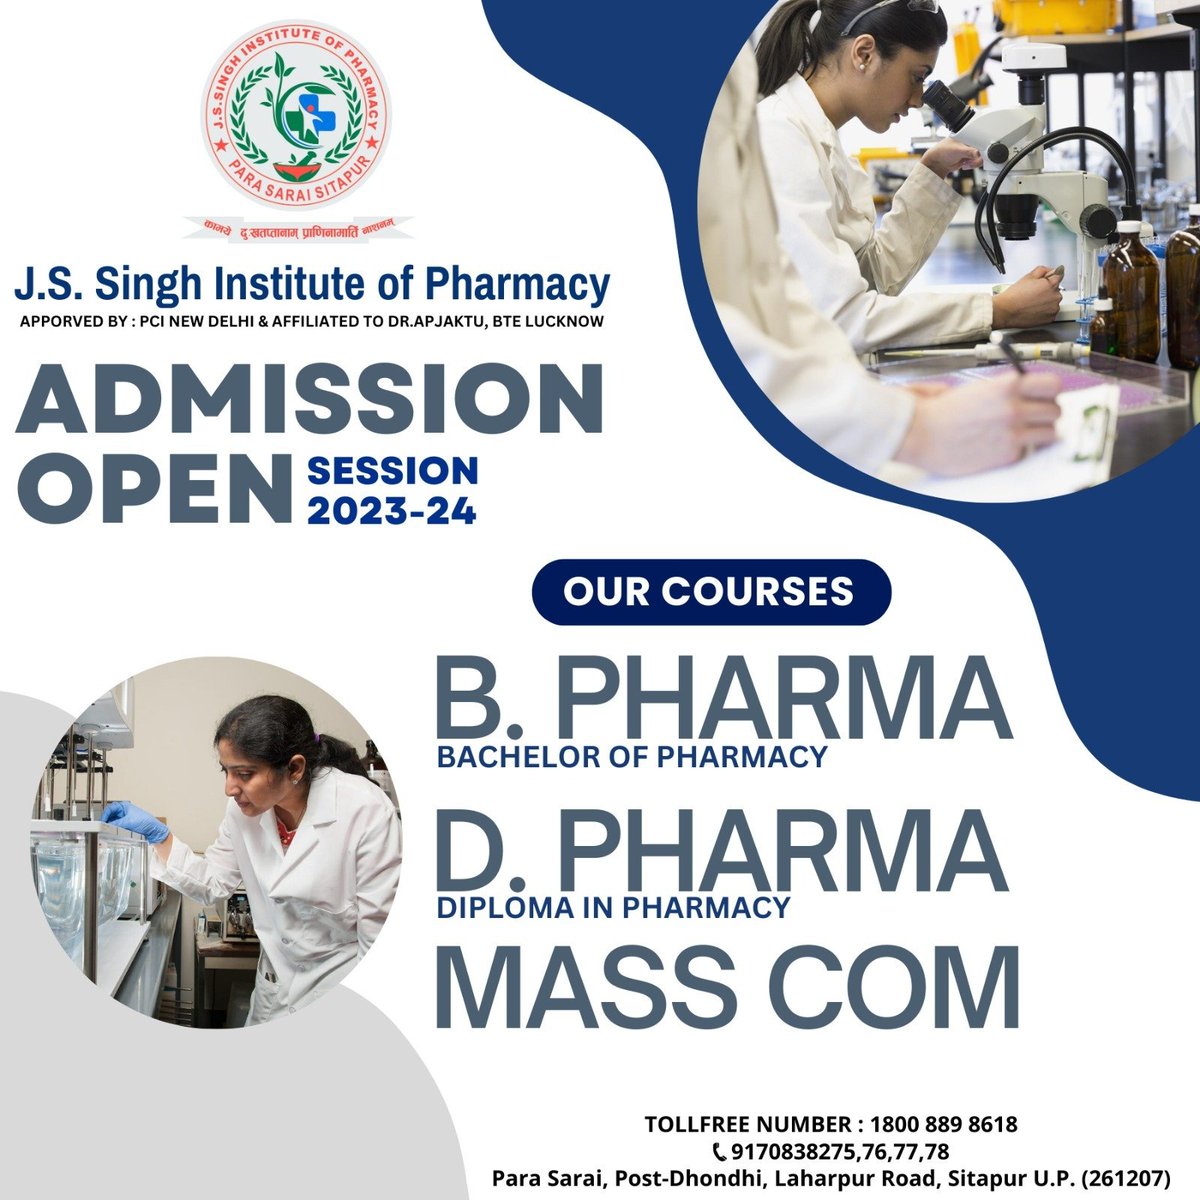 Admission Open
Session:- 2023-24
J. S. Singh Institute of Pharmacy Sitapur
Contact:- 9170838275, 76, 77, 78
#Admission #pharmacy #parasarai #pharmacycollege #institute #AdmissionsOpen #admissions2023 #pharmacistlife #pharmaceutical #healthylifestyle #MassComm #MassCommunication